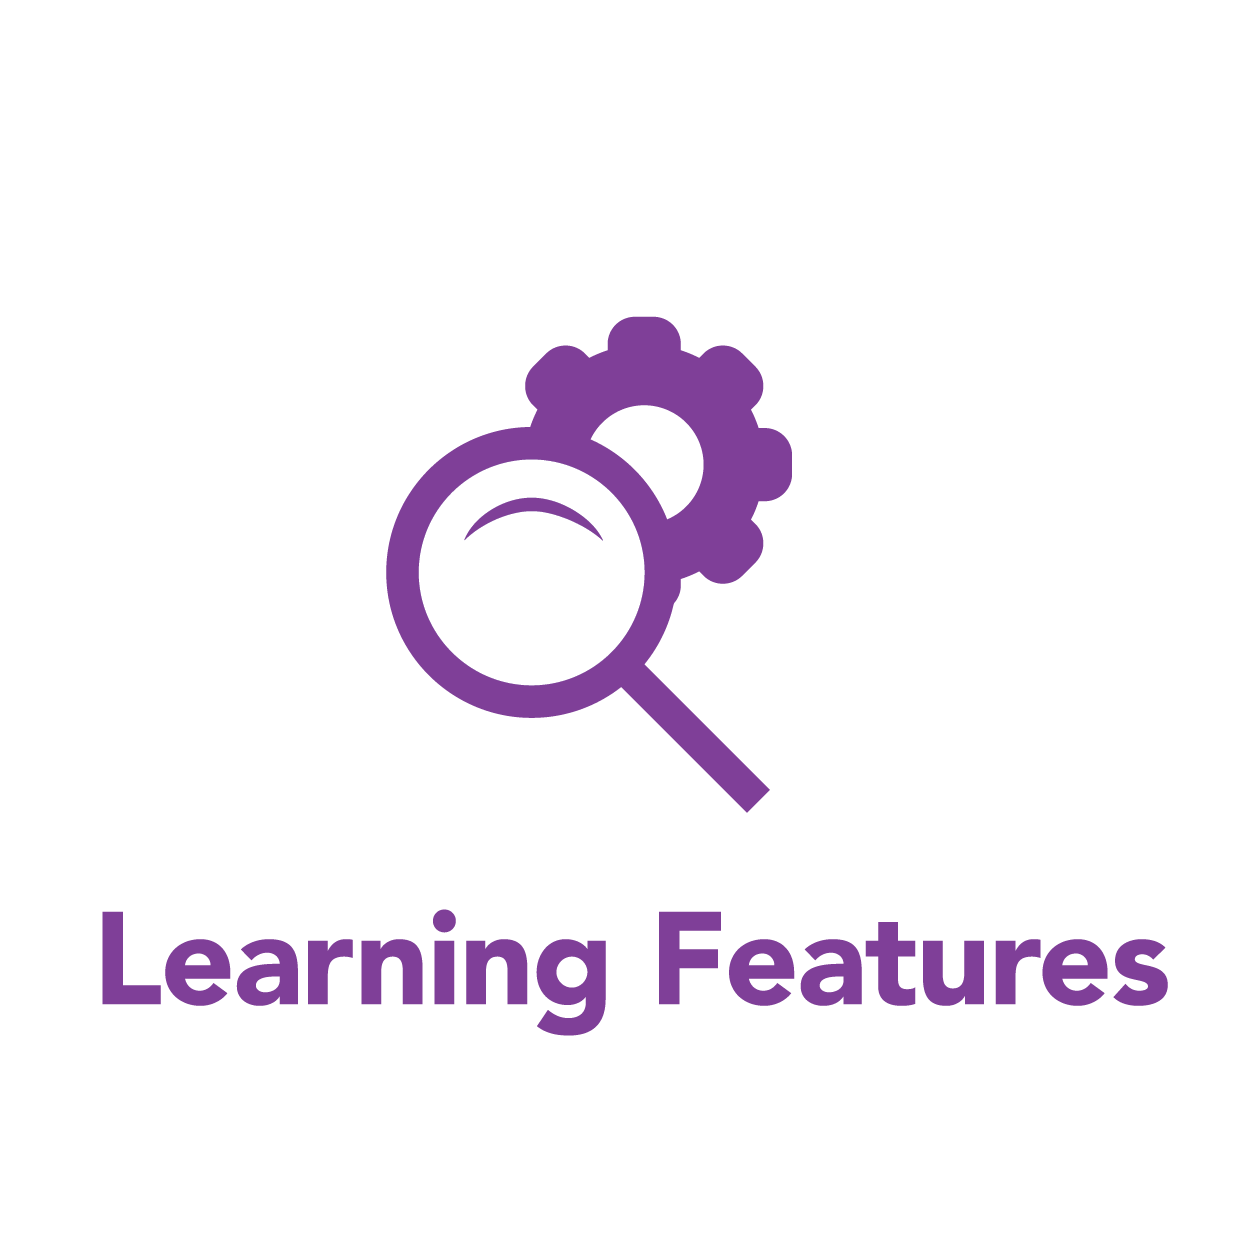 Learning Features